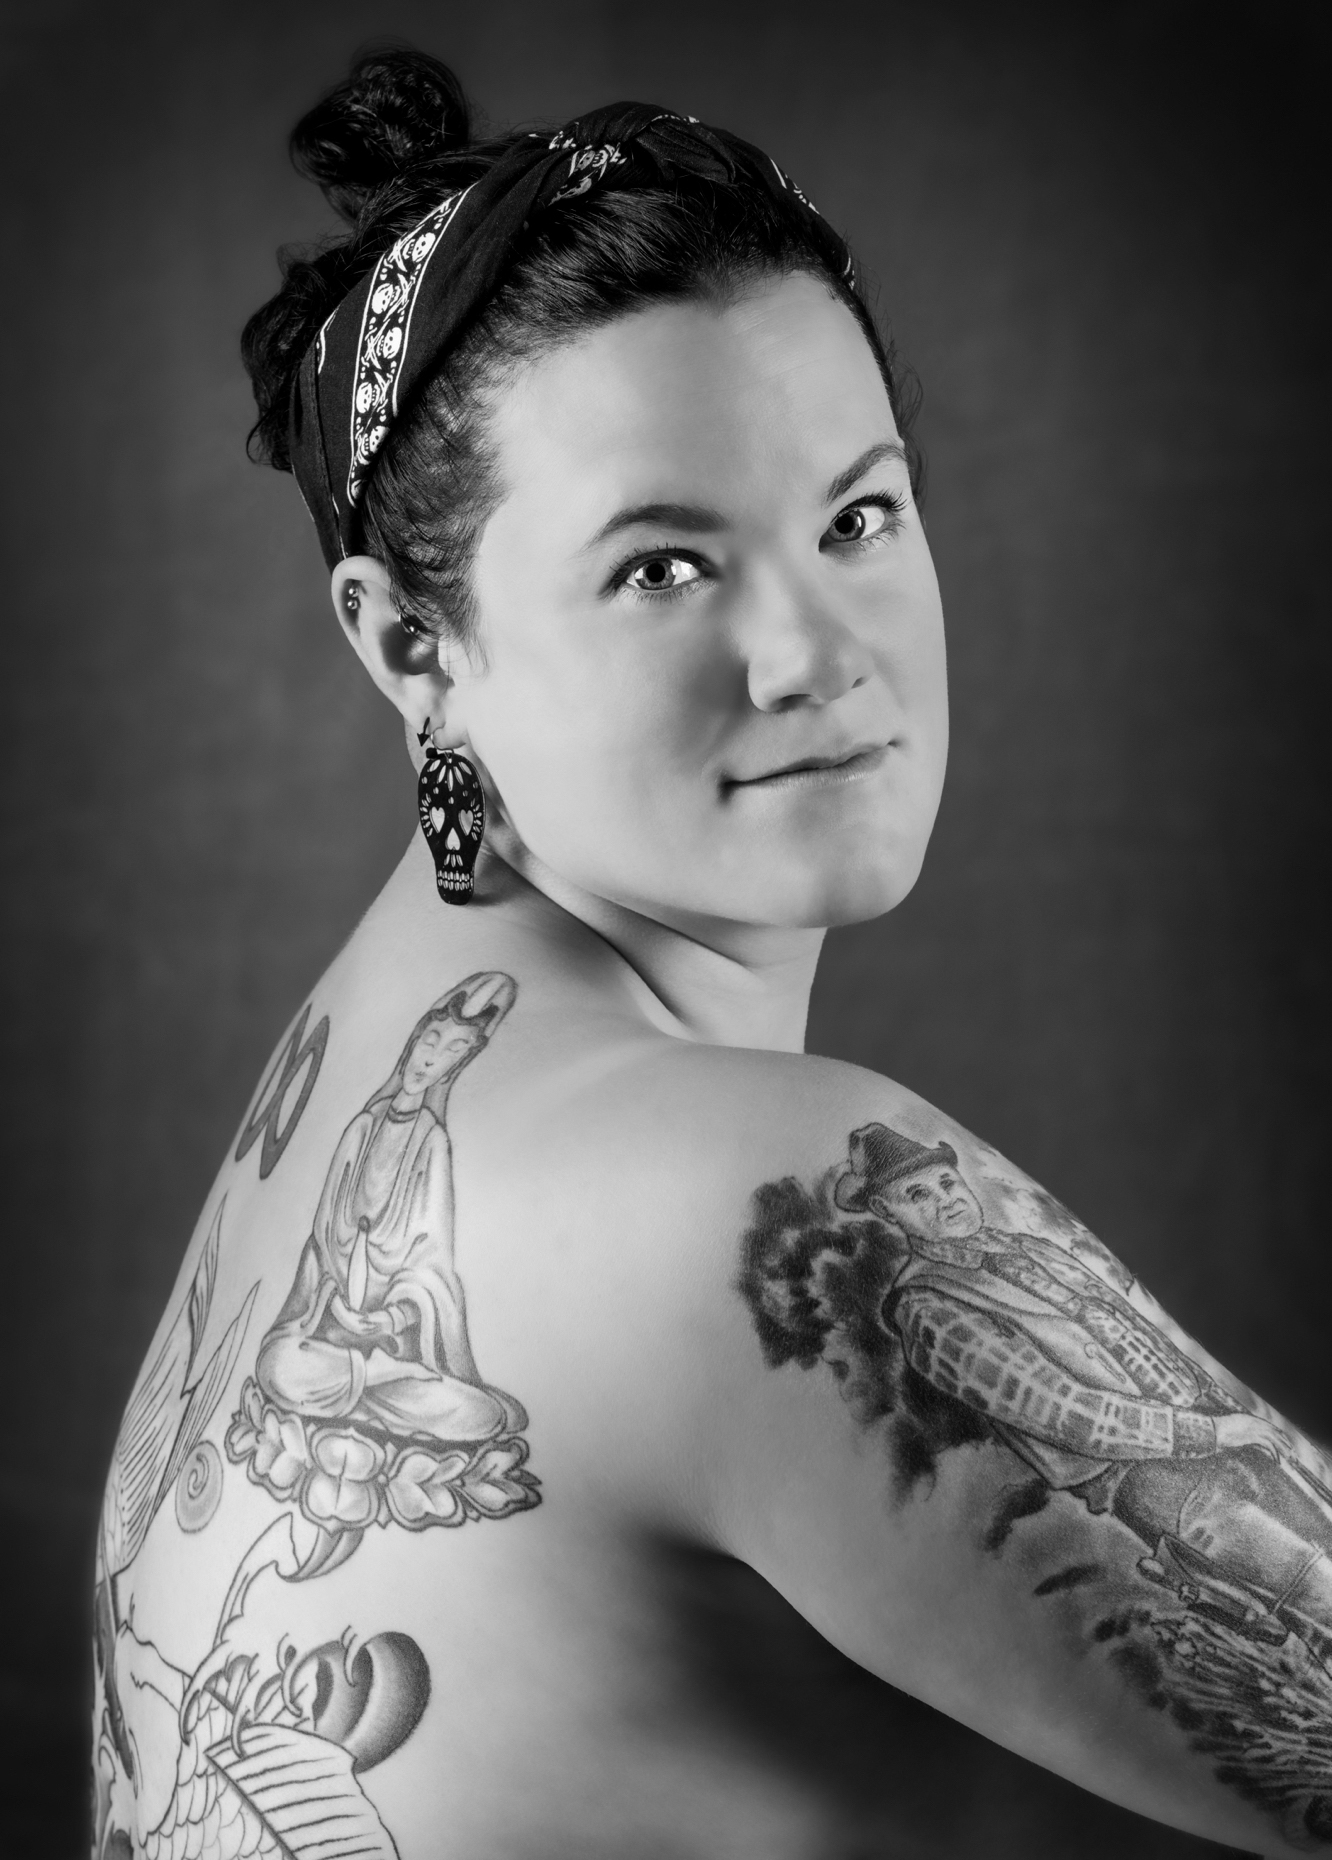 Black & white studio portrait of tattoos on a beautiful young nude woman